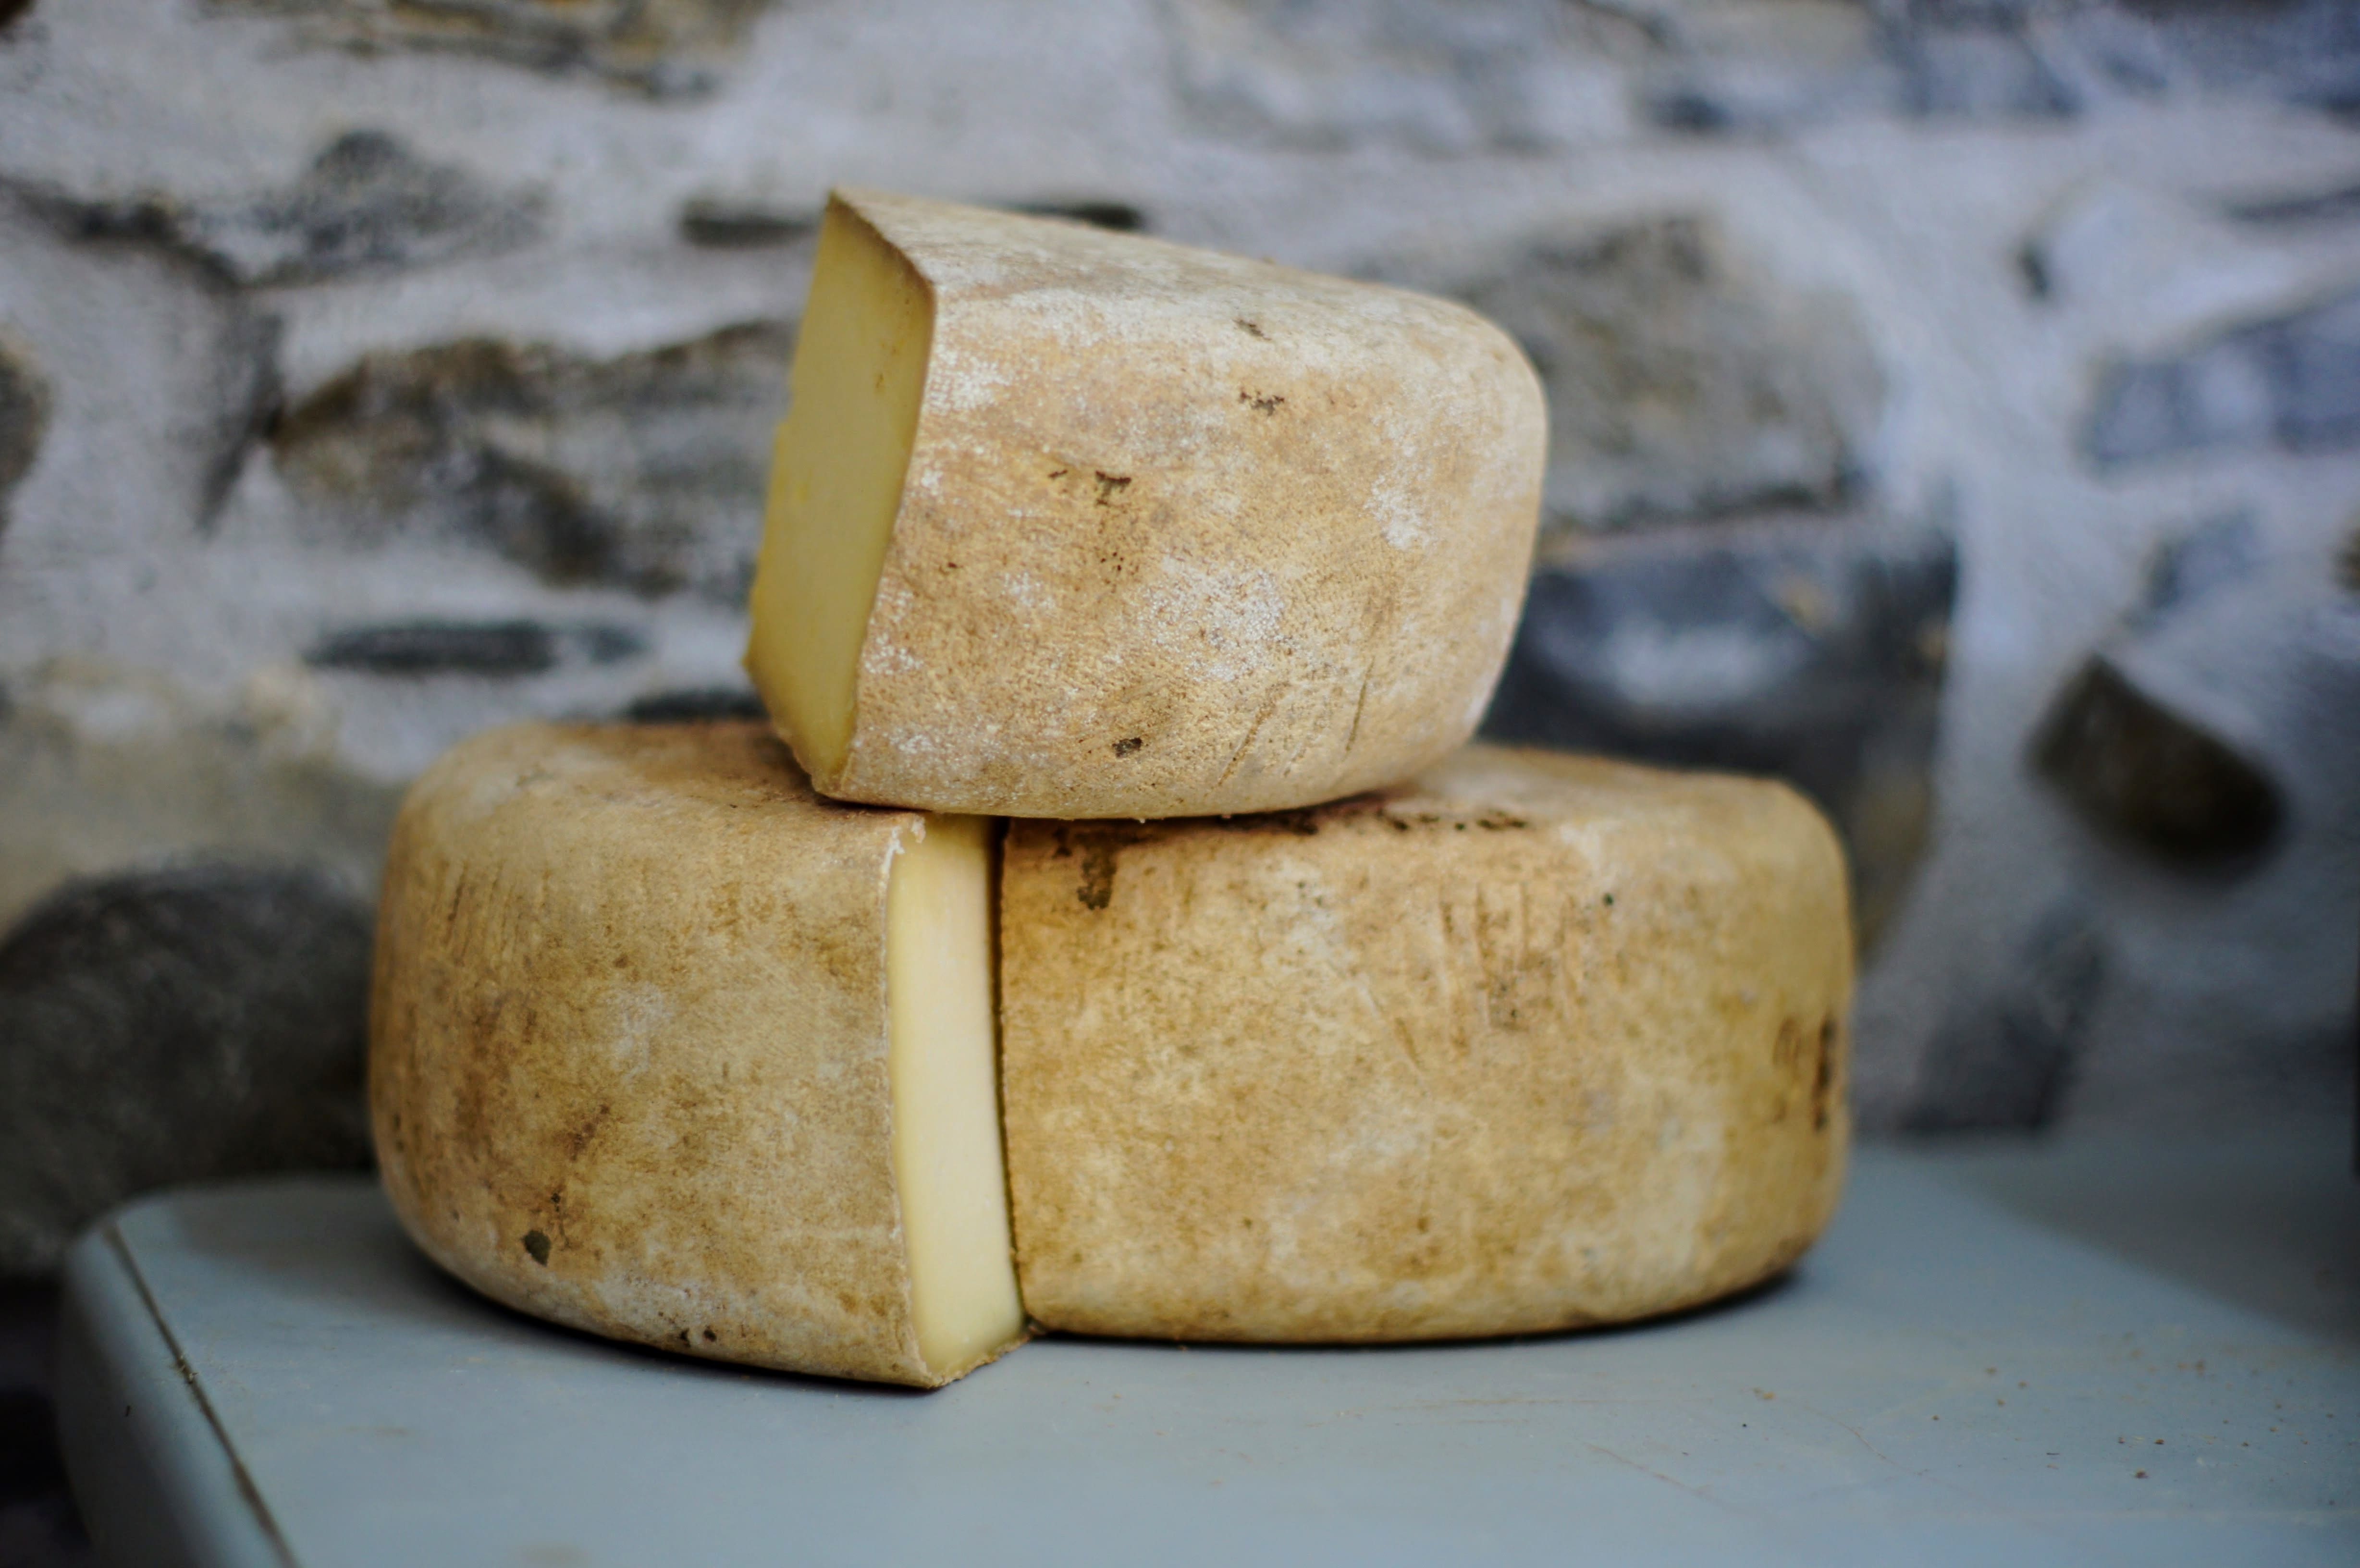 A wheel of smoked cheddar cheese cut in quarters.